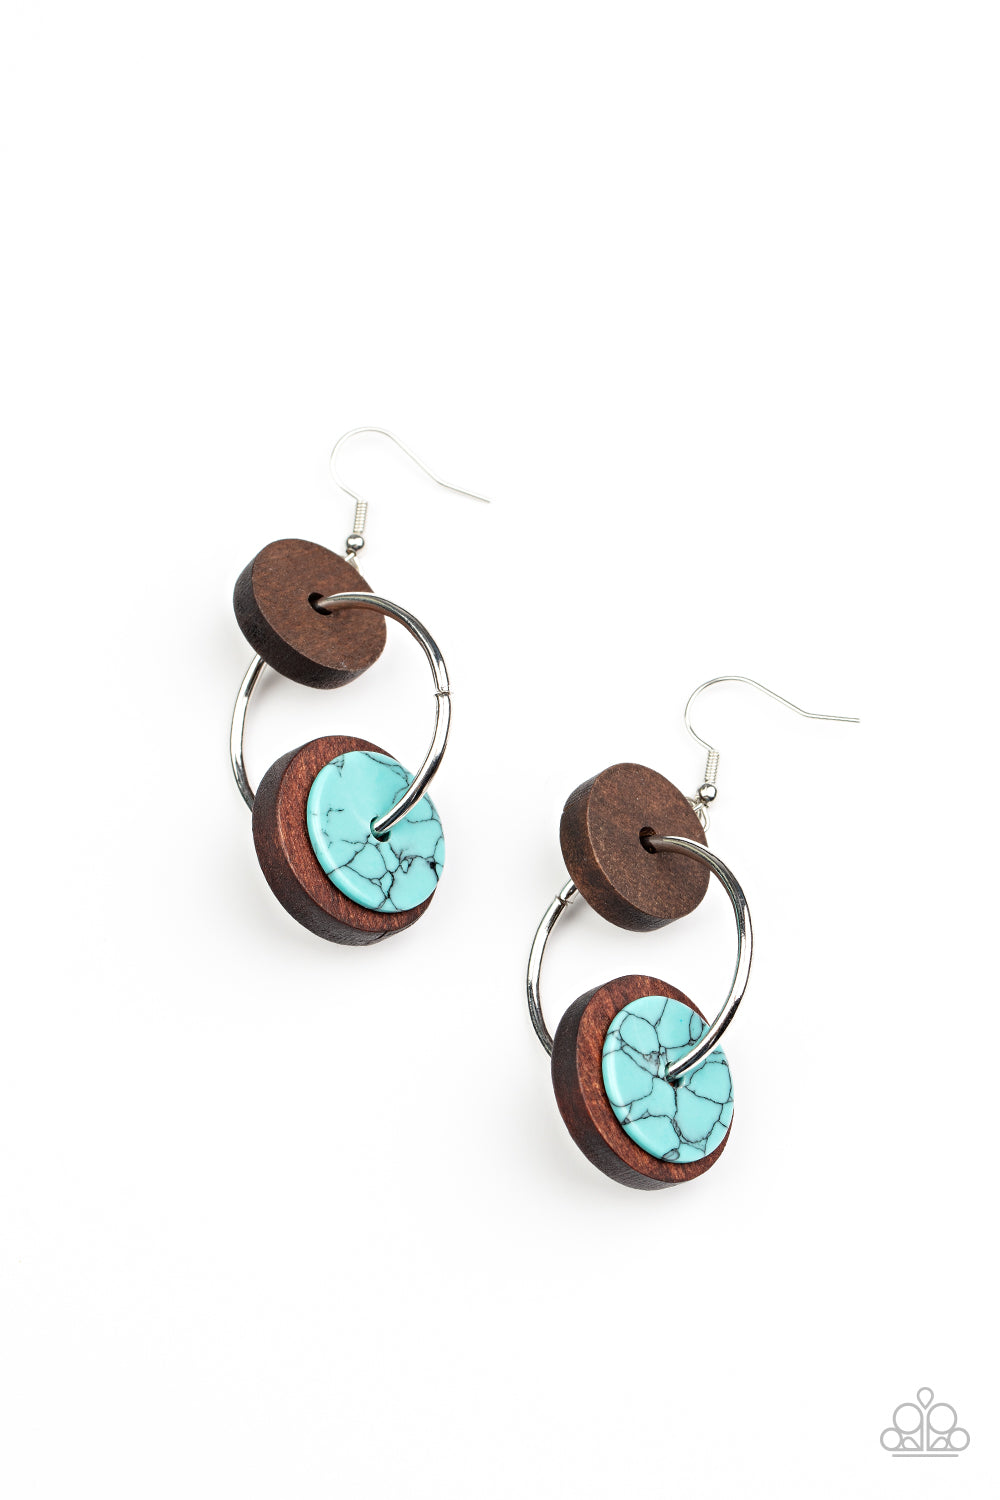 Artisanal Aesthetic Blue Earring - Paparazzi Accessories  An earthy collection of brown wood and turquoise stone discs are threaded along a silver hoop, linking into a trendy lure for an artisan inspired fashion. Earring attaches to a standard fishhook fitting.  Sold as one pair of earrings.